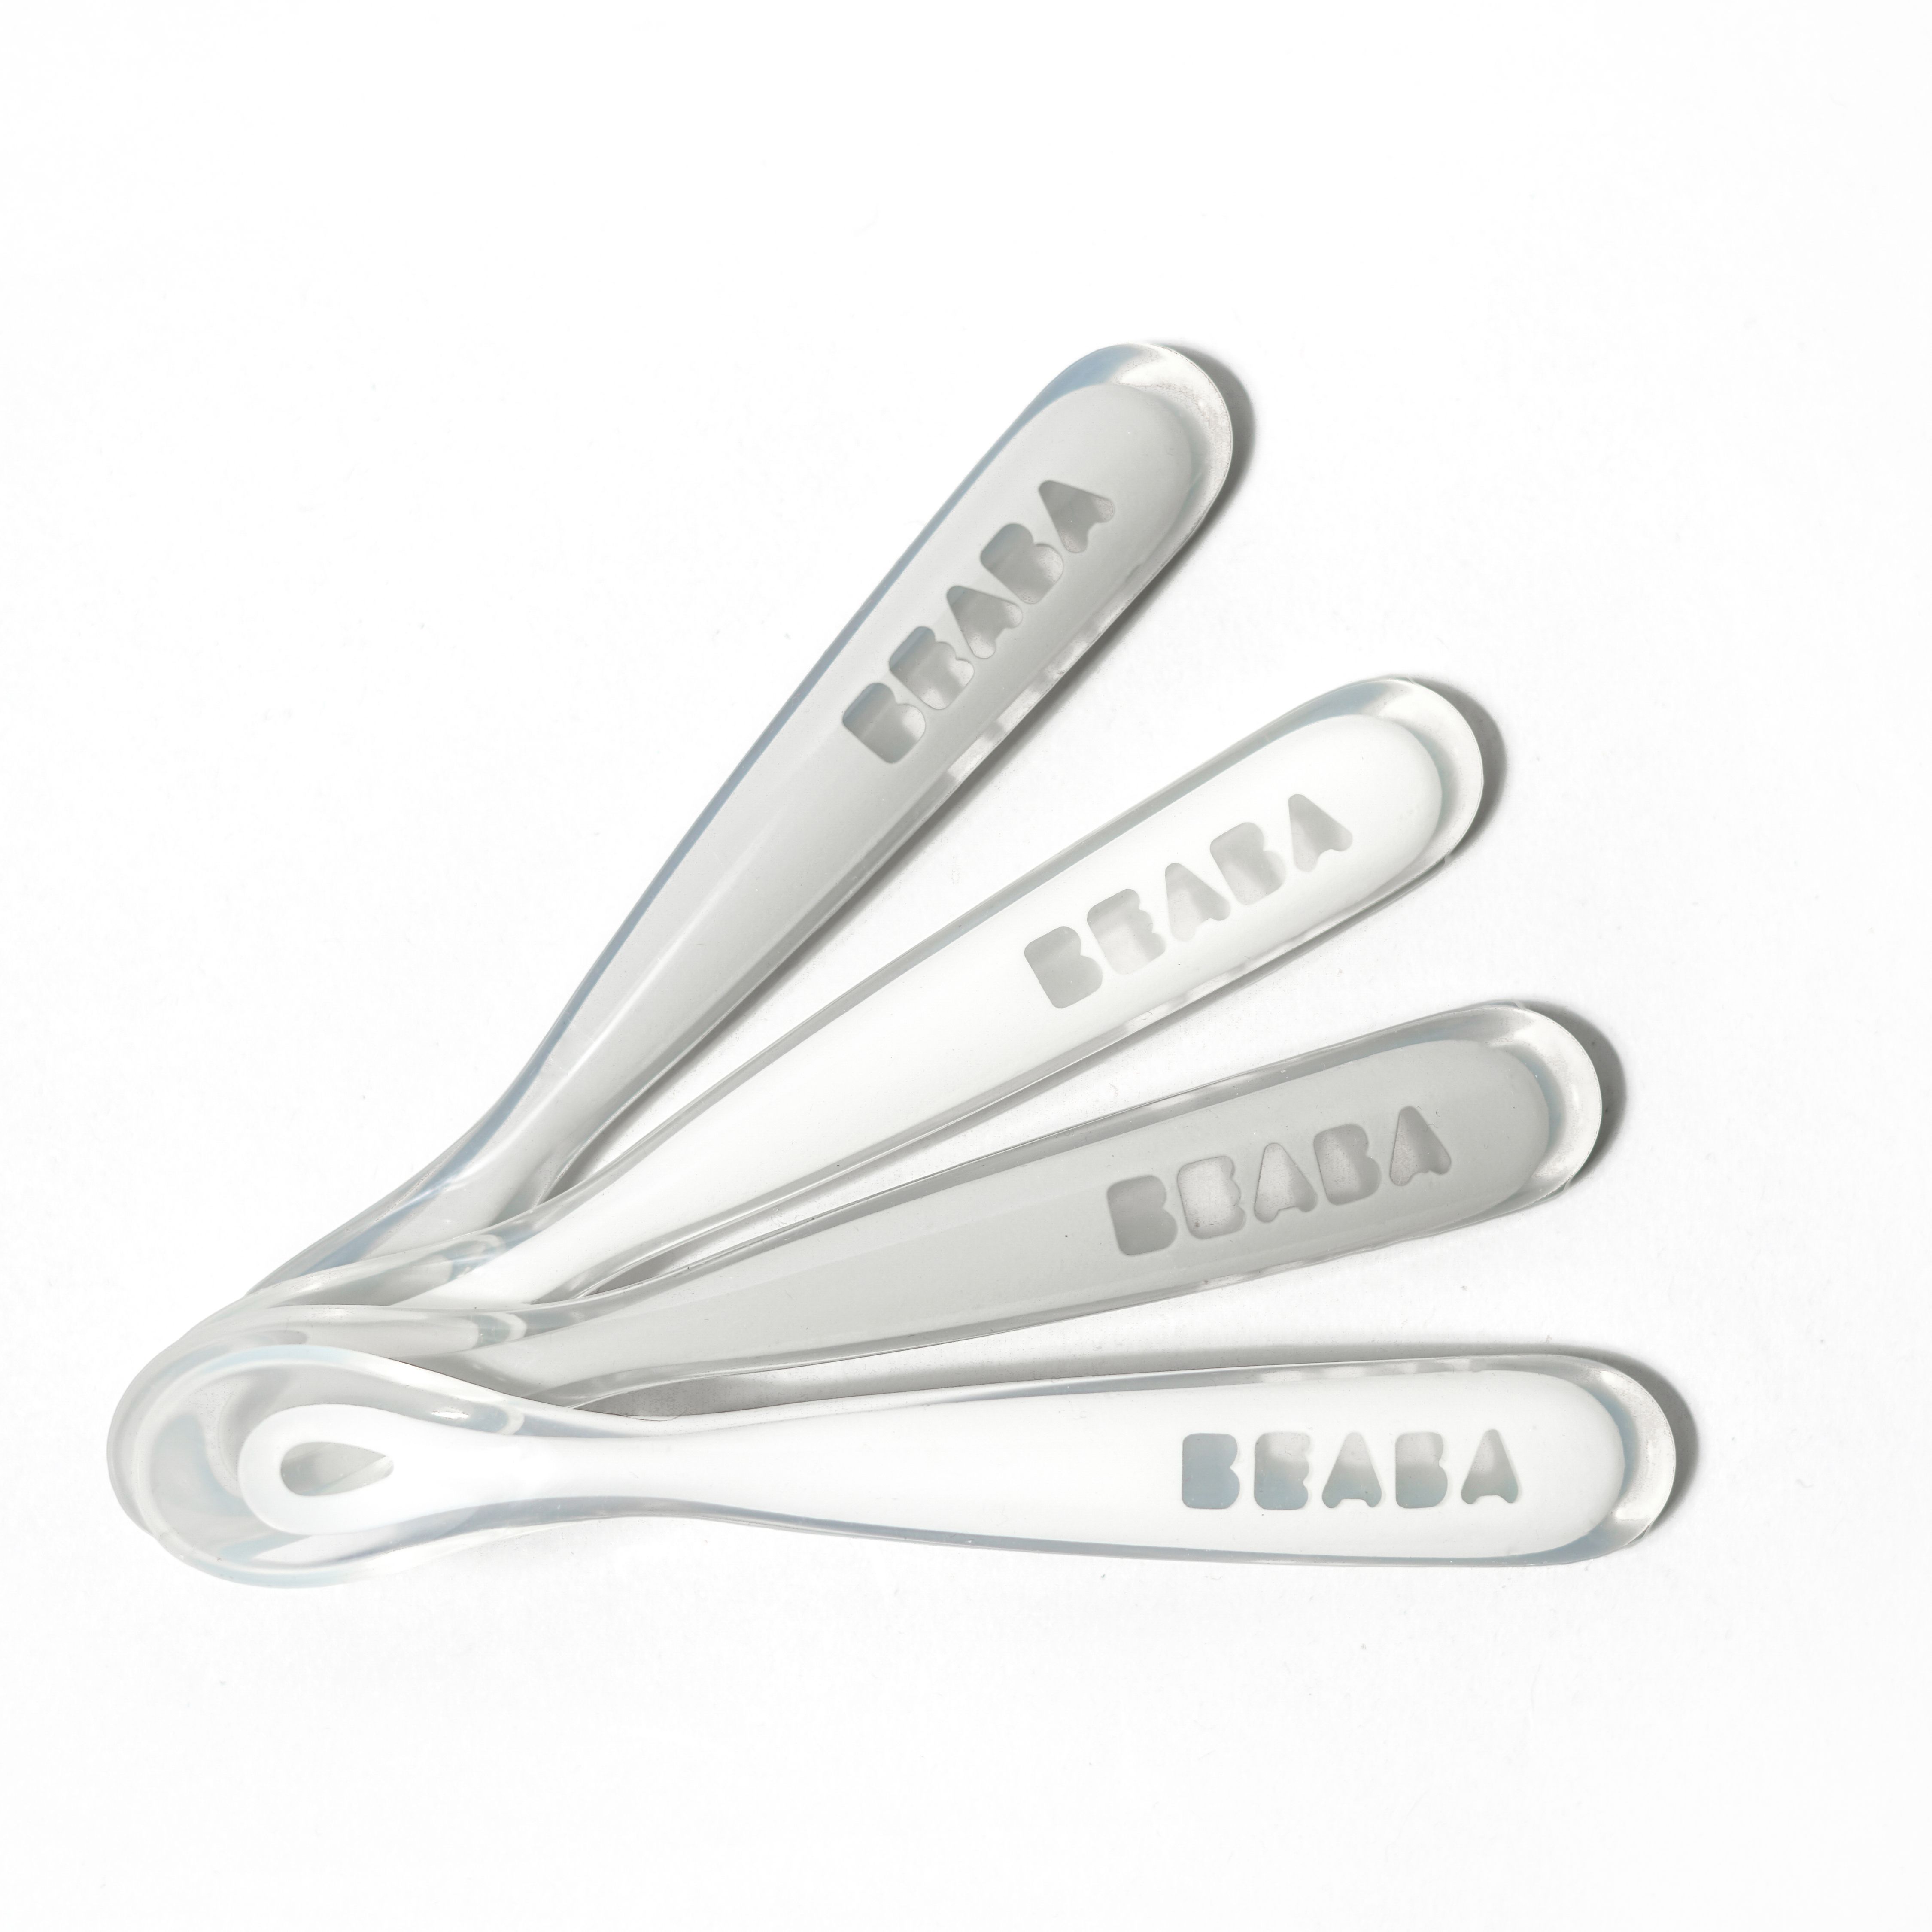 BEABA Silicone Baby Spoons, First Baby Spoons, Soft on Baby Gums, Cloud - image 1 of 4